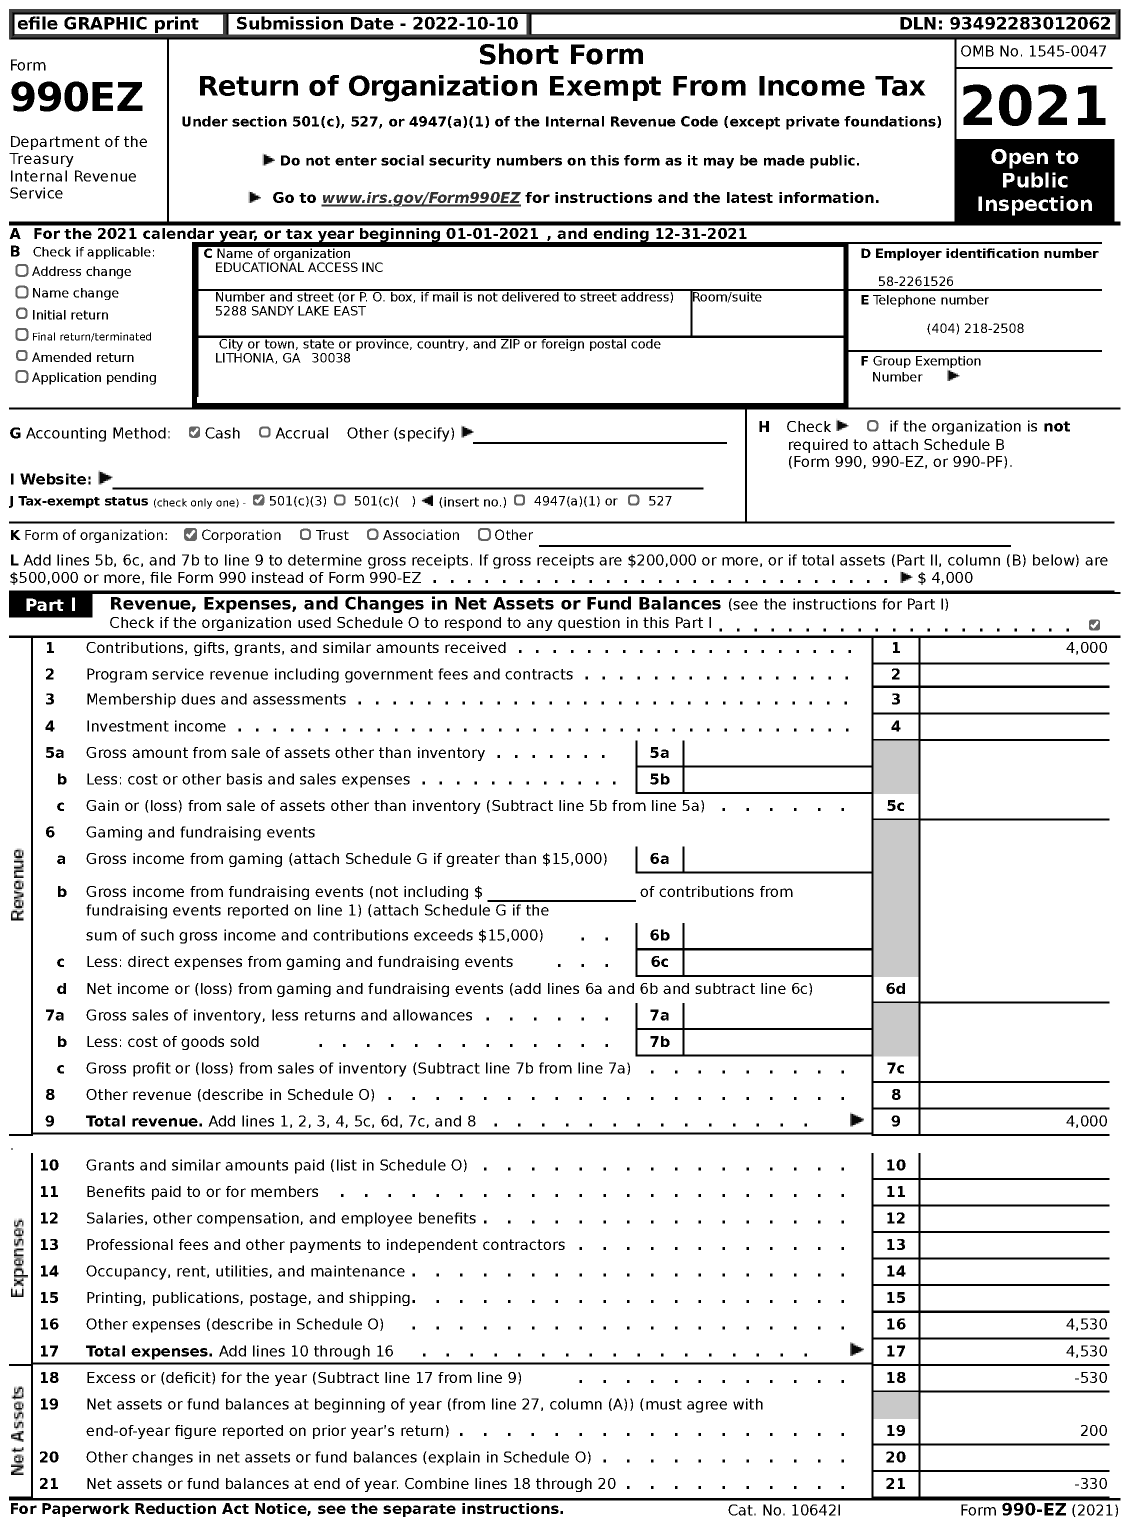 Image of first page of 2021 Form 990EZ for Educational Access